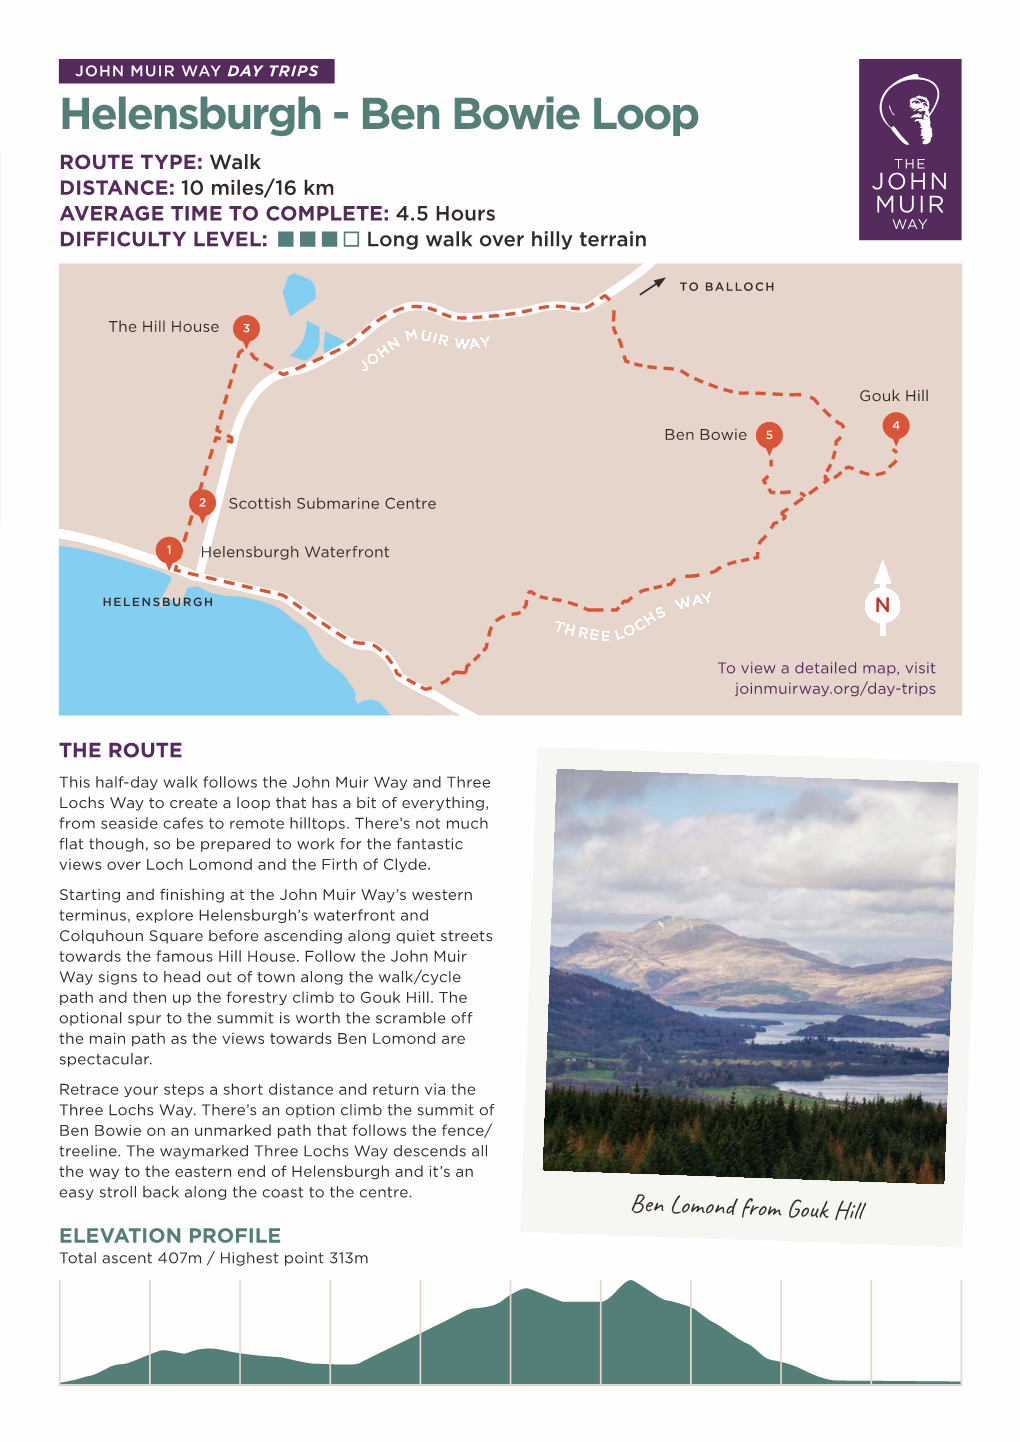 Helensburgh - Ben Bowie Loop ROUTE TYPE: Walk DISTANCE: 10 Miles/16 Km AVERAGE TIME to COMPLETE: 4.5 Hours DIFFICULTY LEVEL: Long Walk Over Hilly Terrain